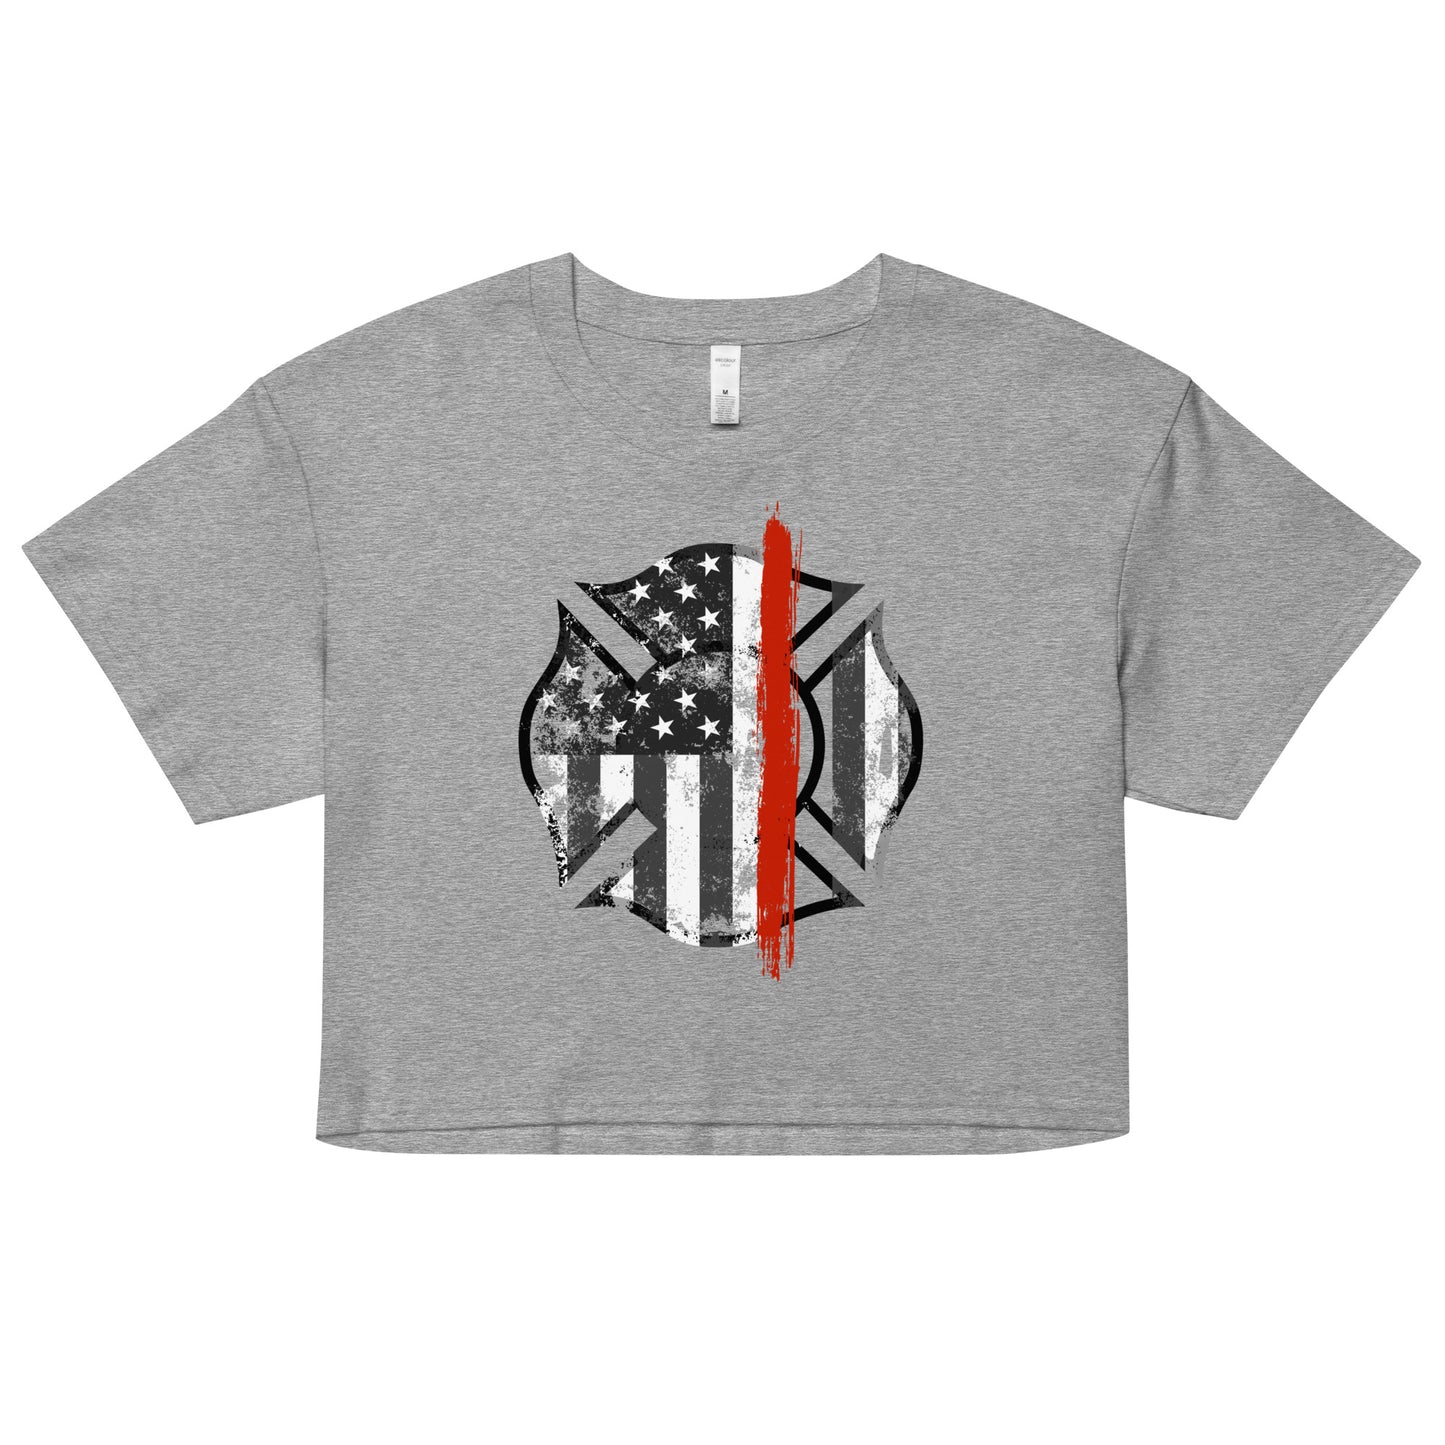 Back the Red women's crop top. Firefighter Thin Red Line shirt in light heather grey.